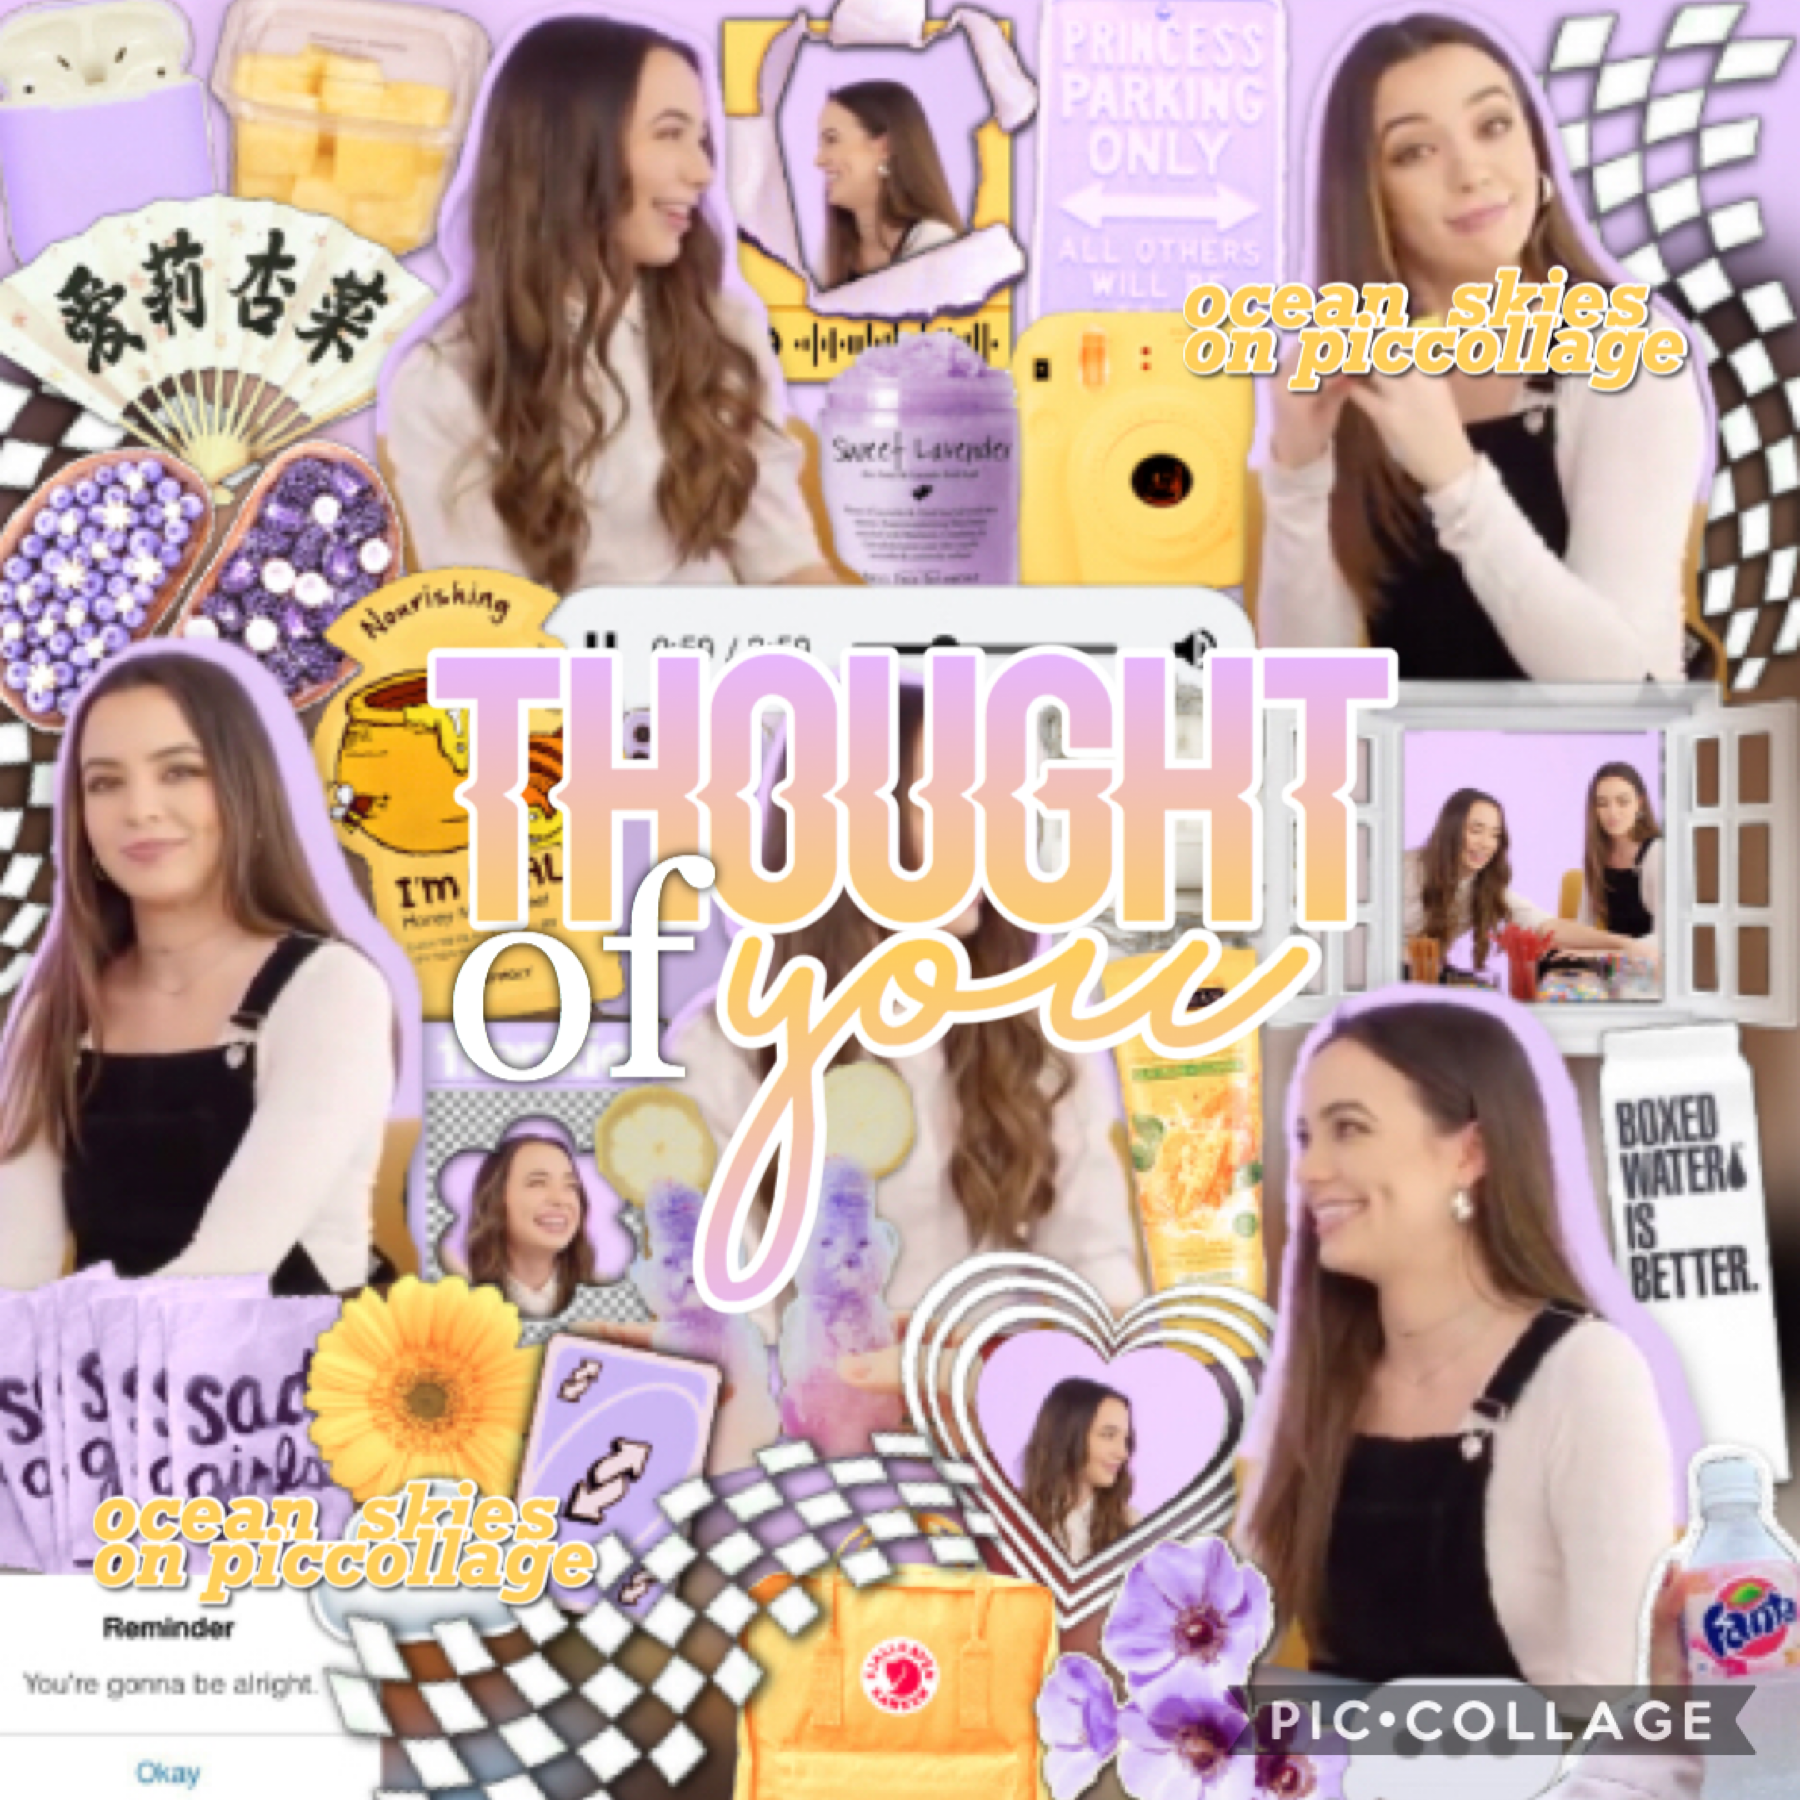 t a p
this took me forever and idek why 🥴 tbh i don’t like it that much, also considering making an mxmtoon theme where i only edit mxmtoon bEcaUsE her song audio videos are good for editing. that was longgg sorry 💖